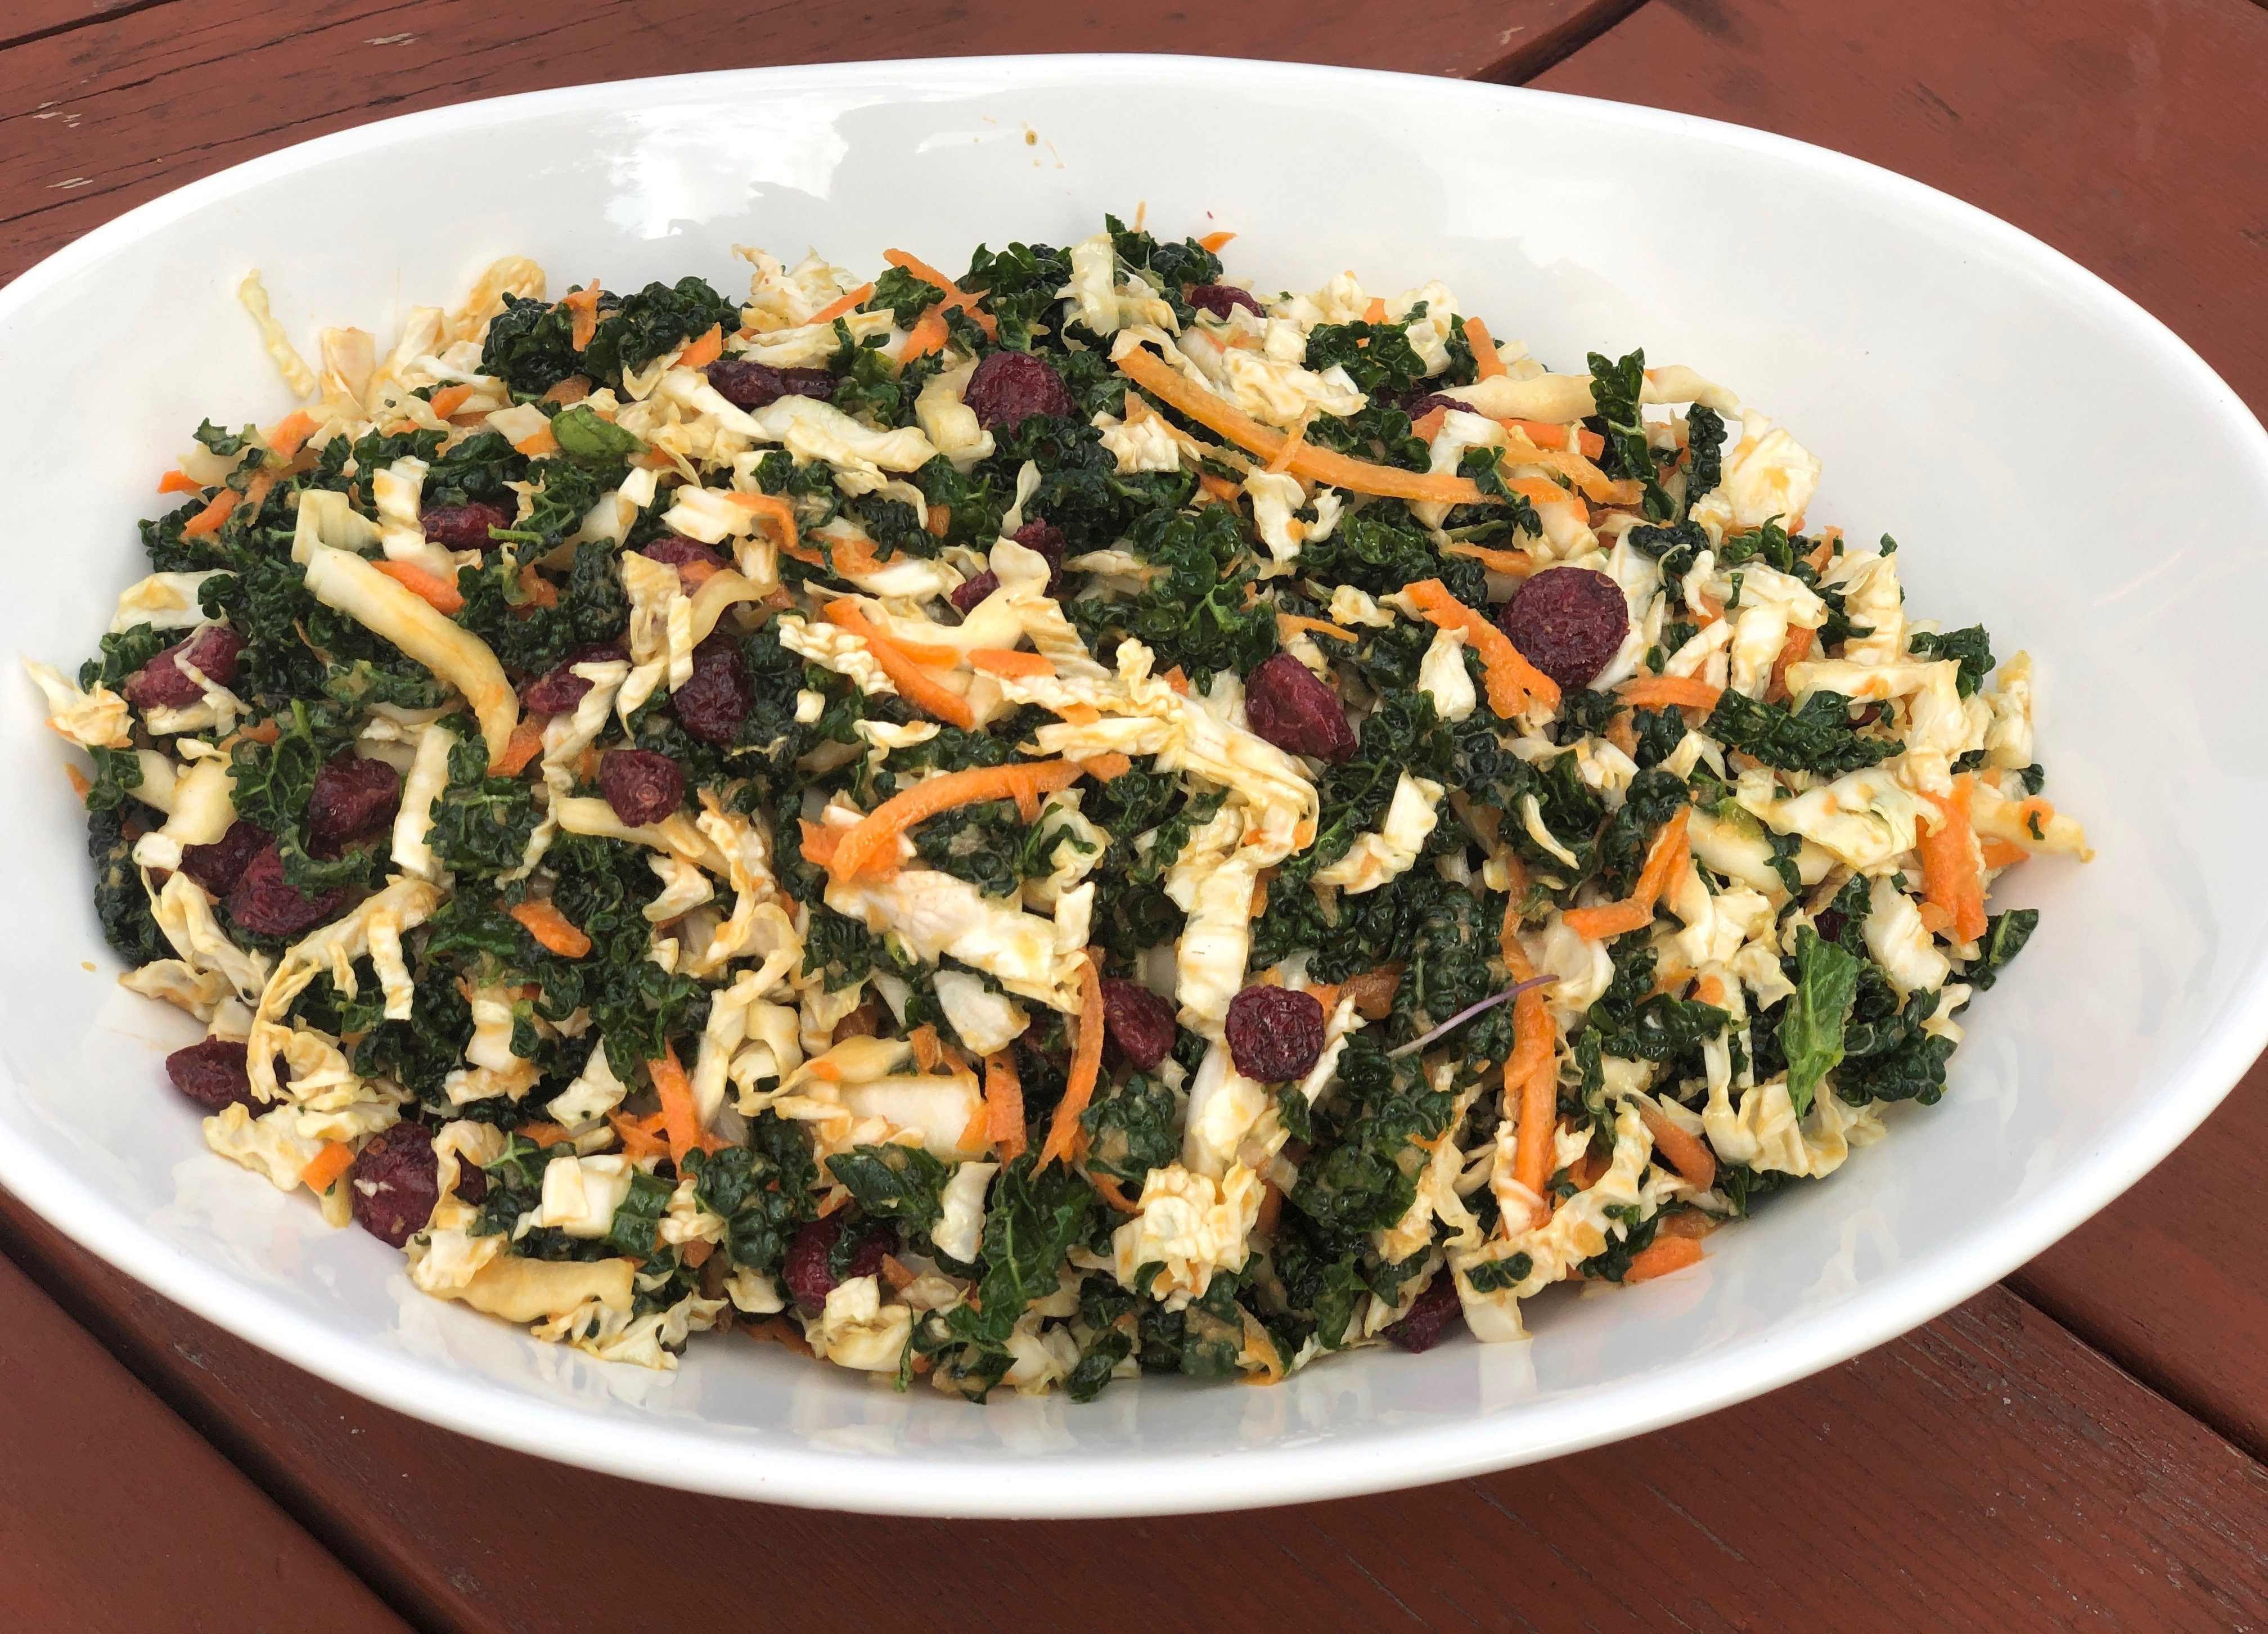 Image for Kale and Napa Cabbage Salad with Carrots and Cranberries, served with a Japanese Dressing